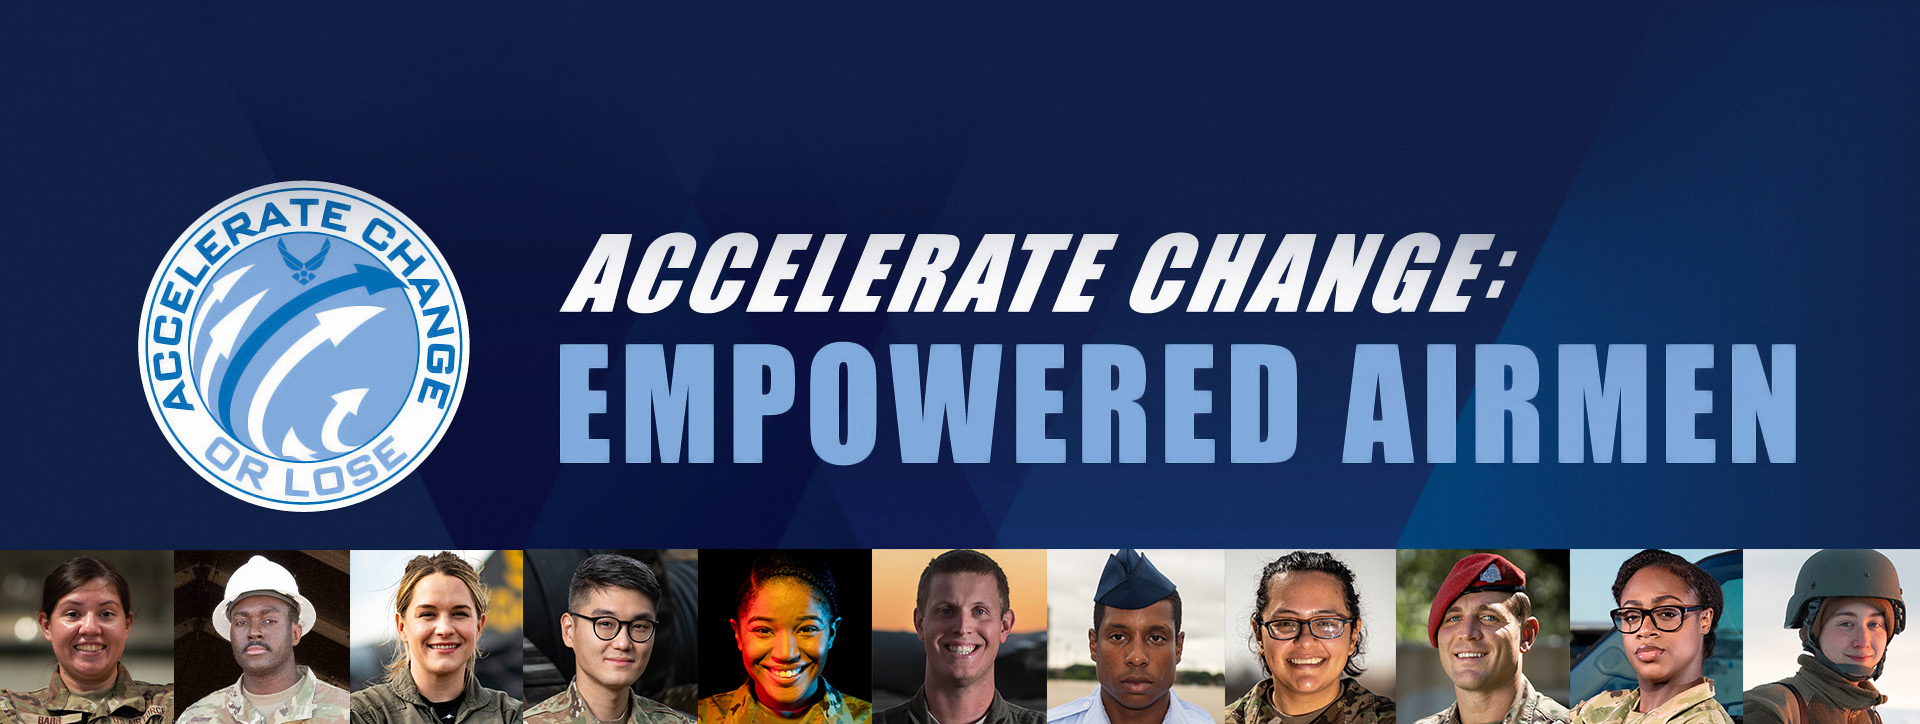 Accelerate Change: Empowered Airmen